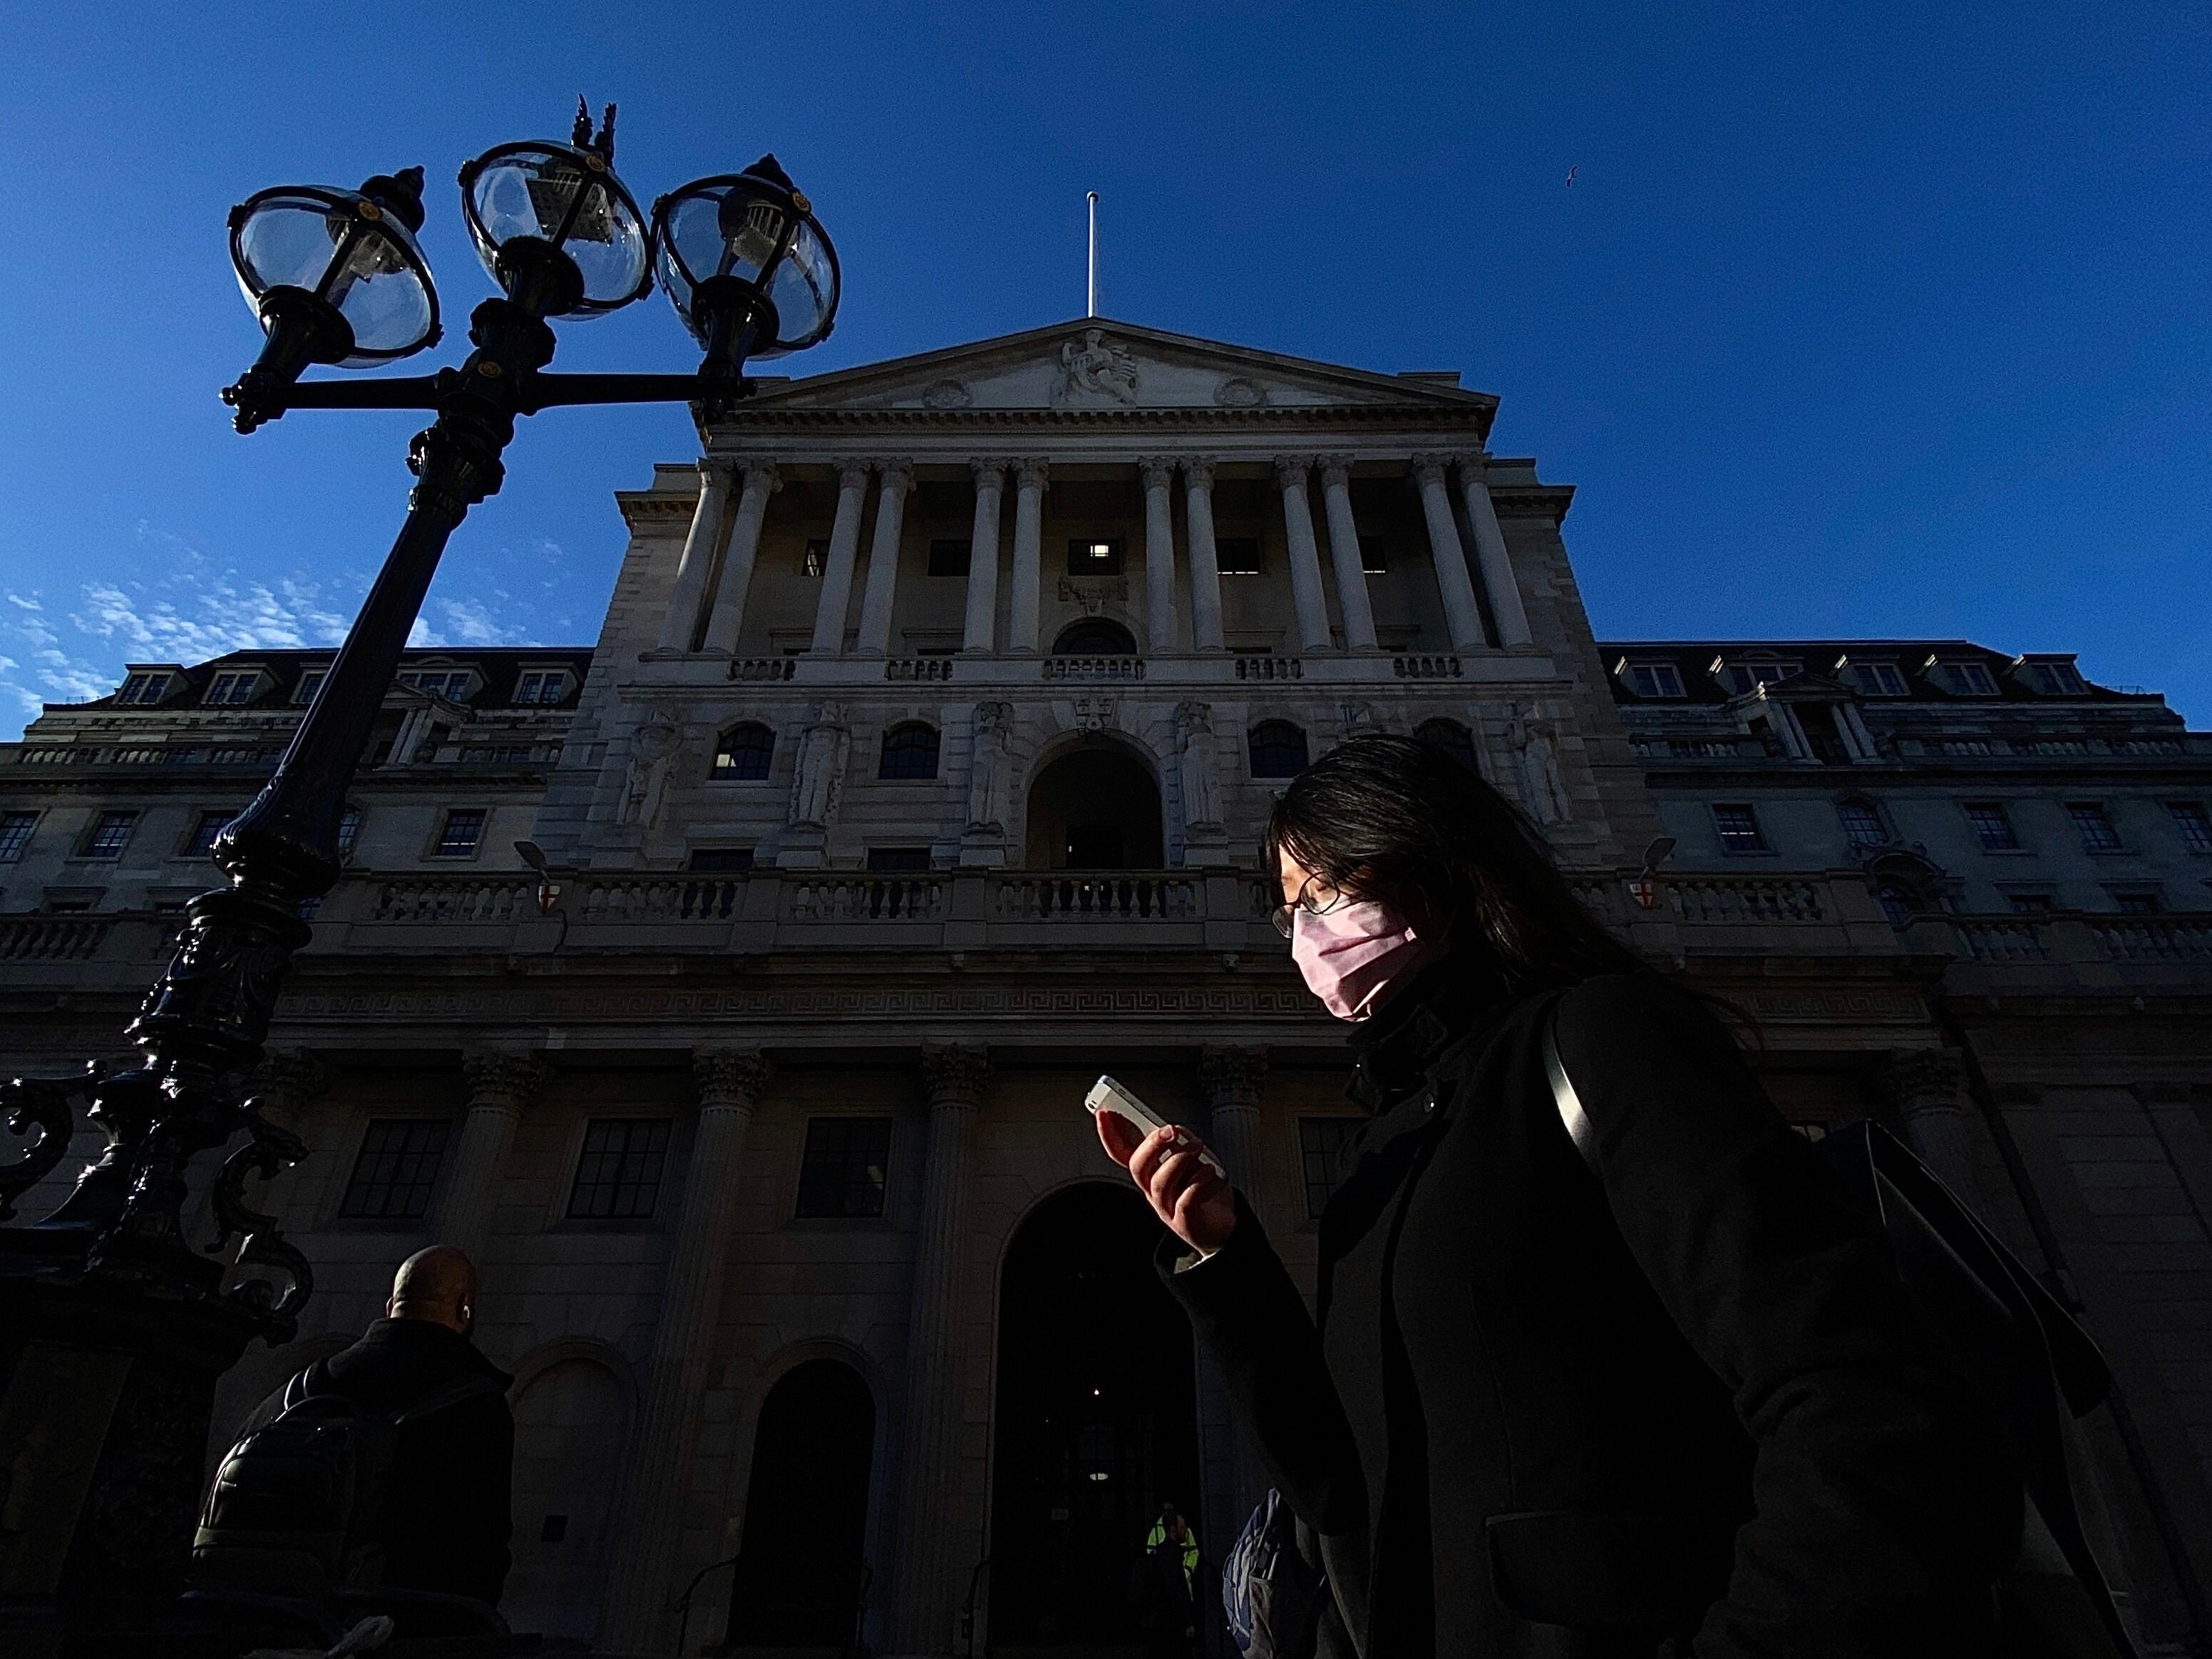 Dark times: a pedestrian passes the Bank of England during the coronavirus lockdown. Photo: AFP